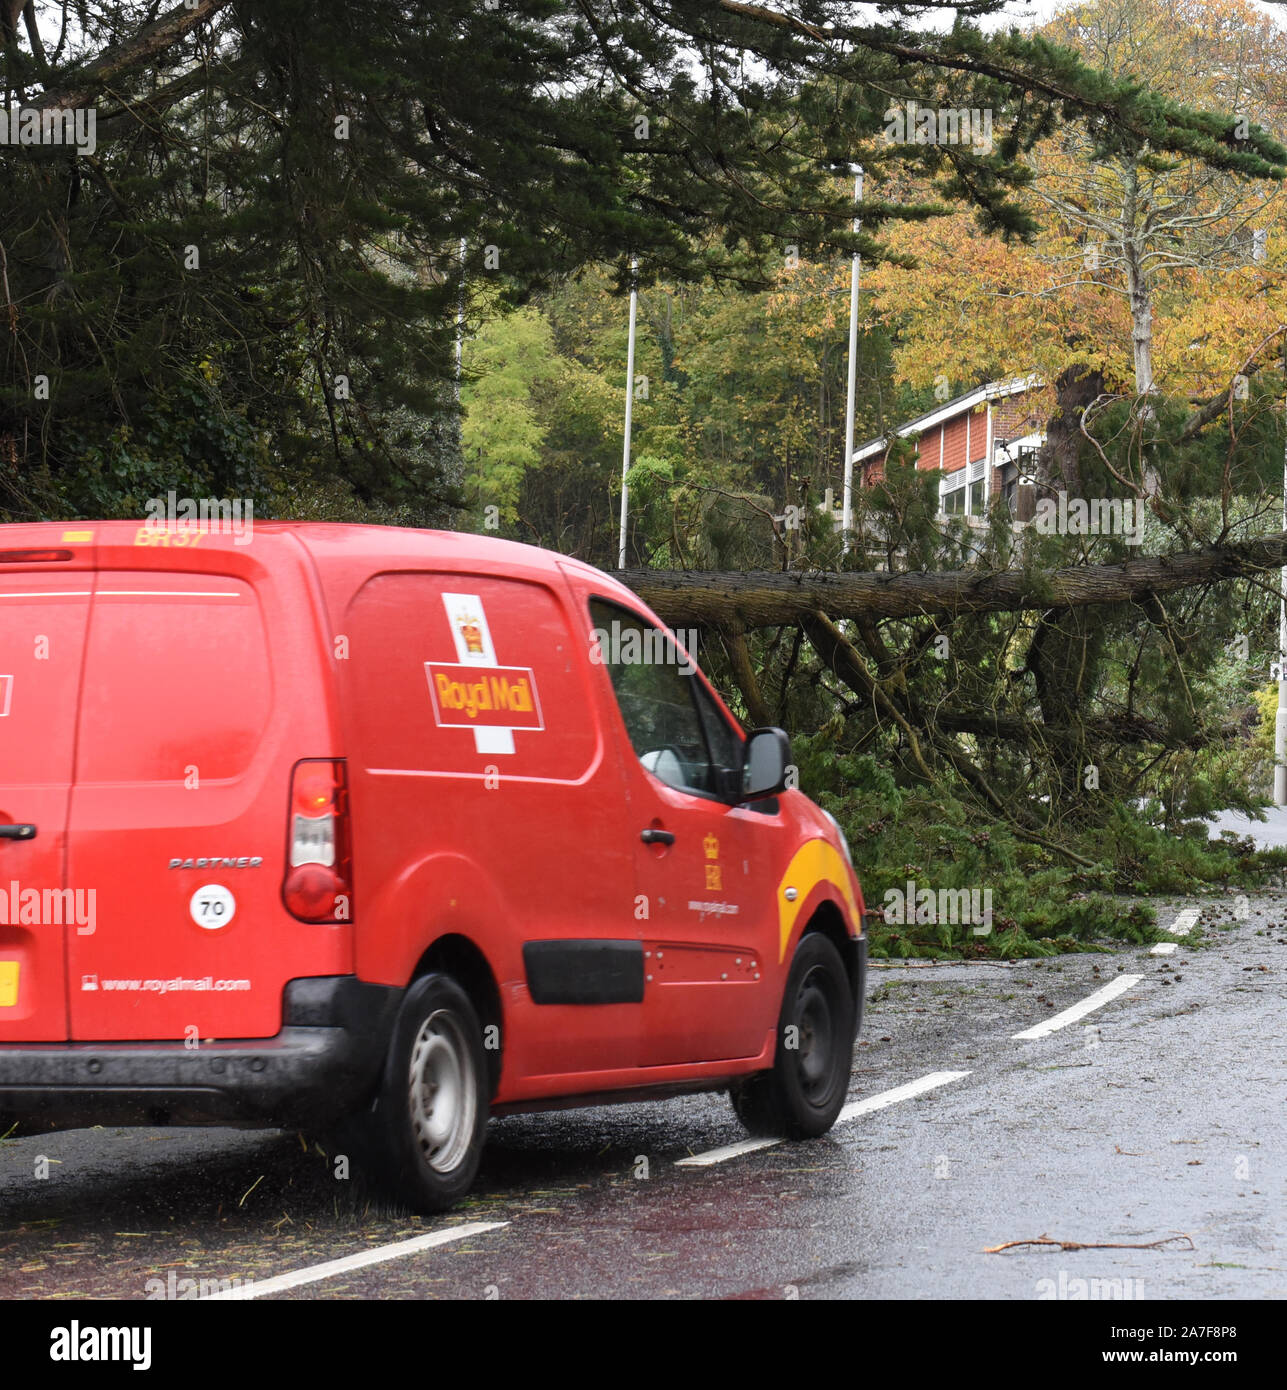 Lyme Regis, Dorset, UK.  2nd November 2019. UK Weather: Stormy weather and gale force winds bring trees crashing down in West Dorset.  A main route into the coastal resort of Lyme Regis is blocked by a large fallen tree. Vehicles are forced onto the other side of the road to avoid the tree and broken branches. Weather warnings remain in place across the South West as the storm conditions are set to continue.   Credit: Celia McMahon/Alamy Live News. Stock Photo